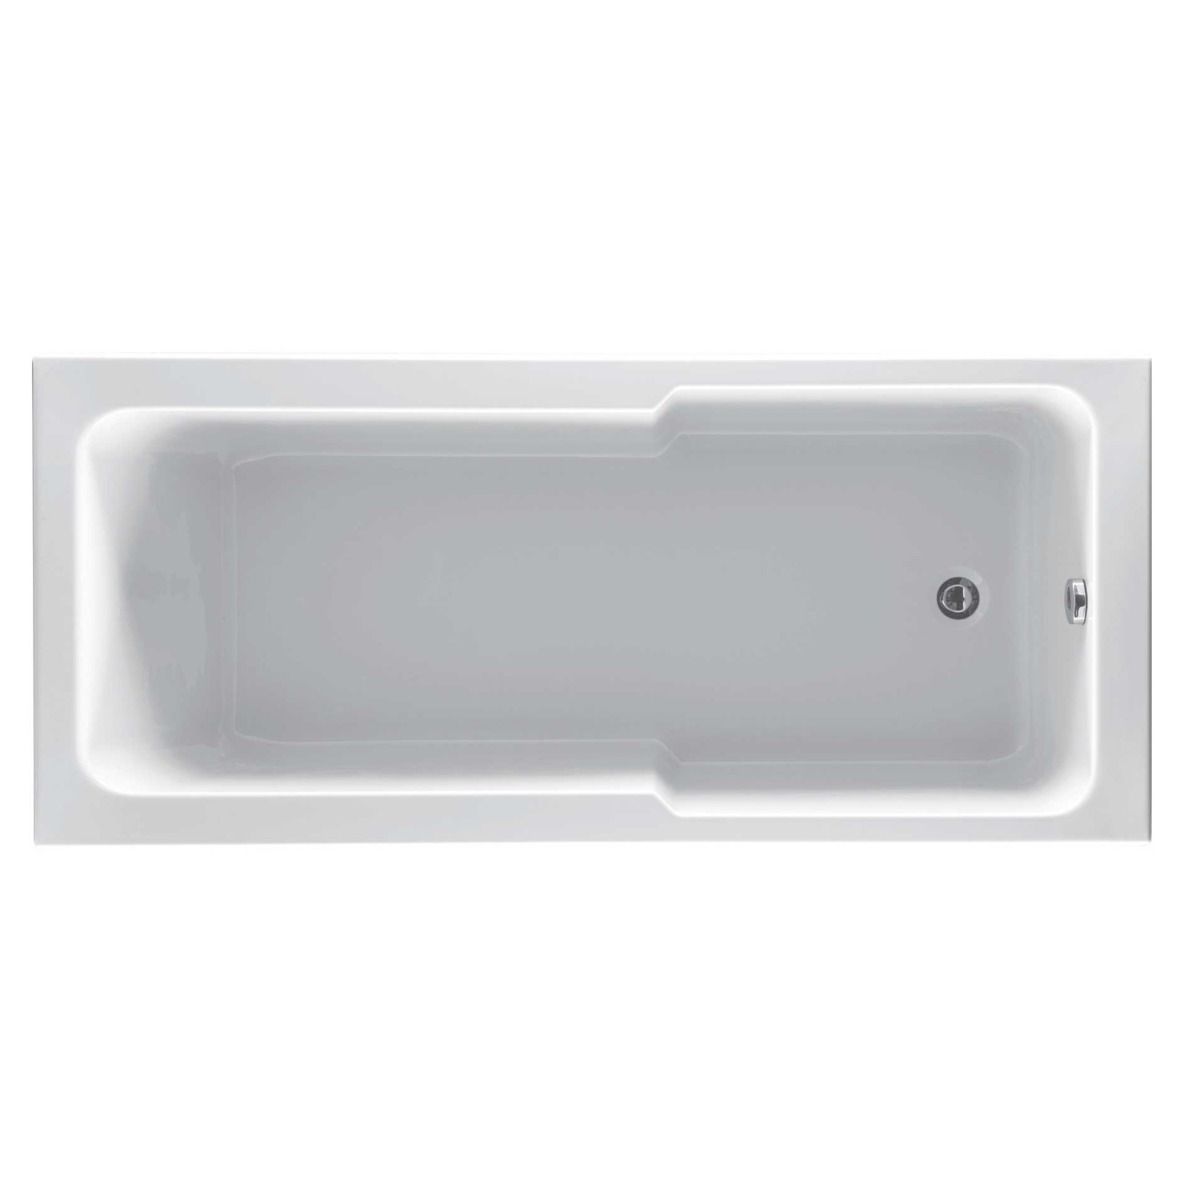 Compact Super Strong Acrylic Shower Bath – 1800x800mm